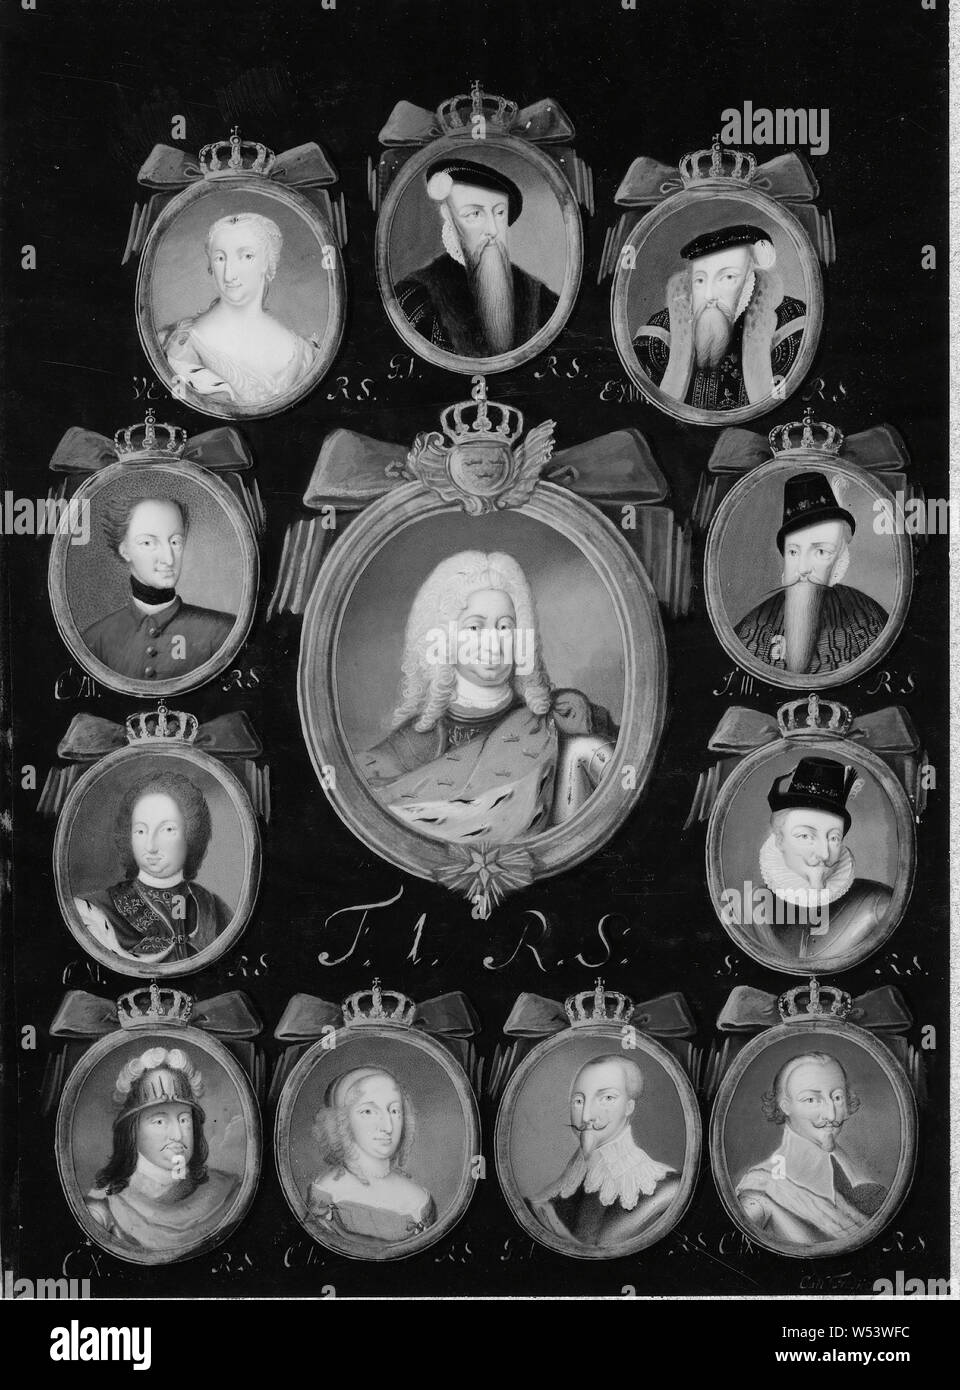 Carl Fredrik Mörck, King Fredrik I, Queen Ulrika Eleonora dy, King Karl XI, King Charles XII, King Karl X Gustav, King Gustav I, King Charles IX, King Johan III, King Sigismund, King Erik XIV, King Gustav II Adolf and, Queen Kristina, Gustav I - Fredrik I, Regentserie with 12 portraits, painting, portrait, Frederick I of Sweden, Gouache on paper and parchment, Height, 31 cm (12.2 inches), Width, 22 cm (8.6 inches, Inscription, UE, RS, , G. I, RS E.XIV, C.XII, RS J.III, RS C. XI, RS F.I, S. RS, C.X, Ch, G.A RS, C.IX, RS Signed, Carl Fredrick Mörck Stock Photo